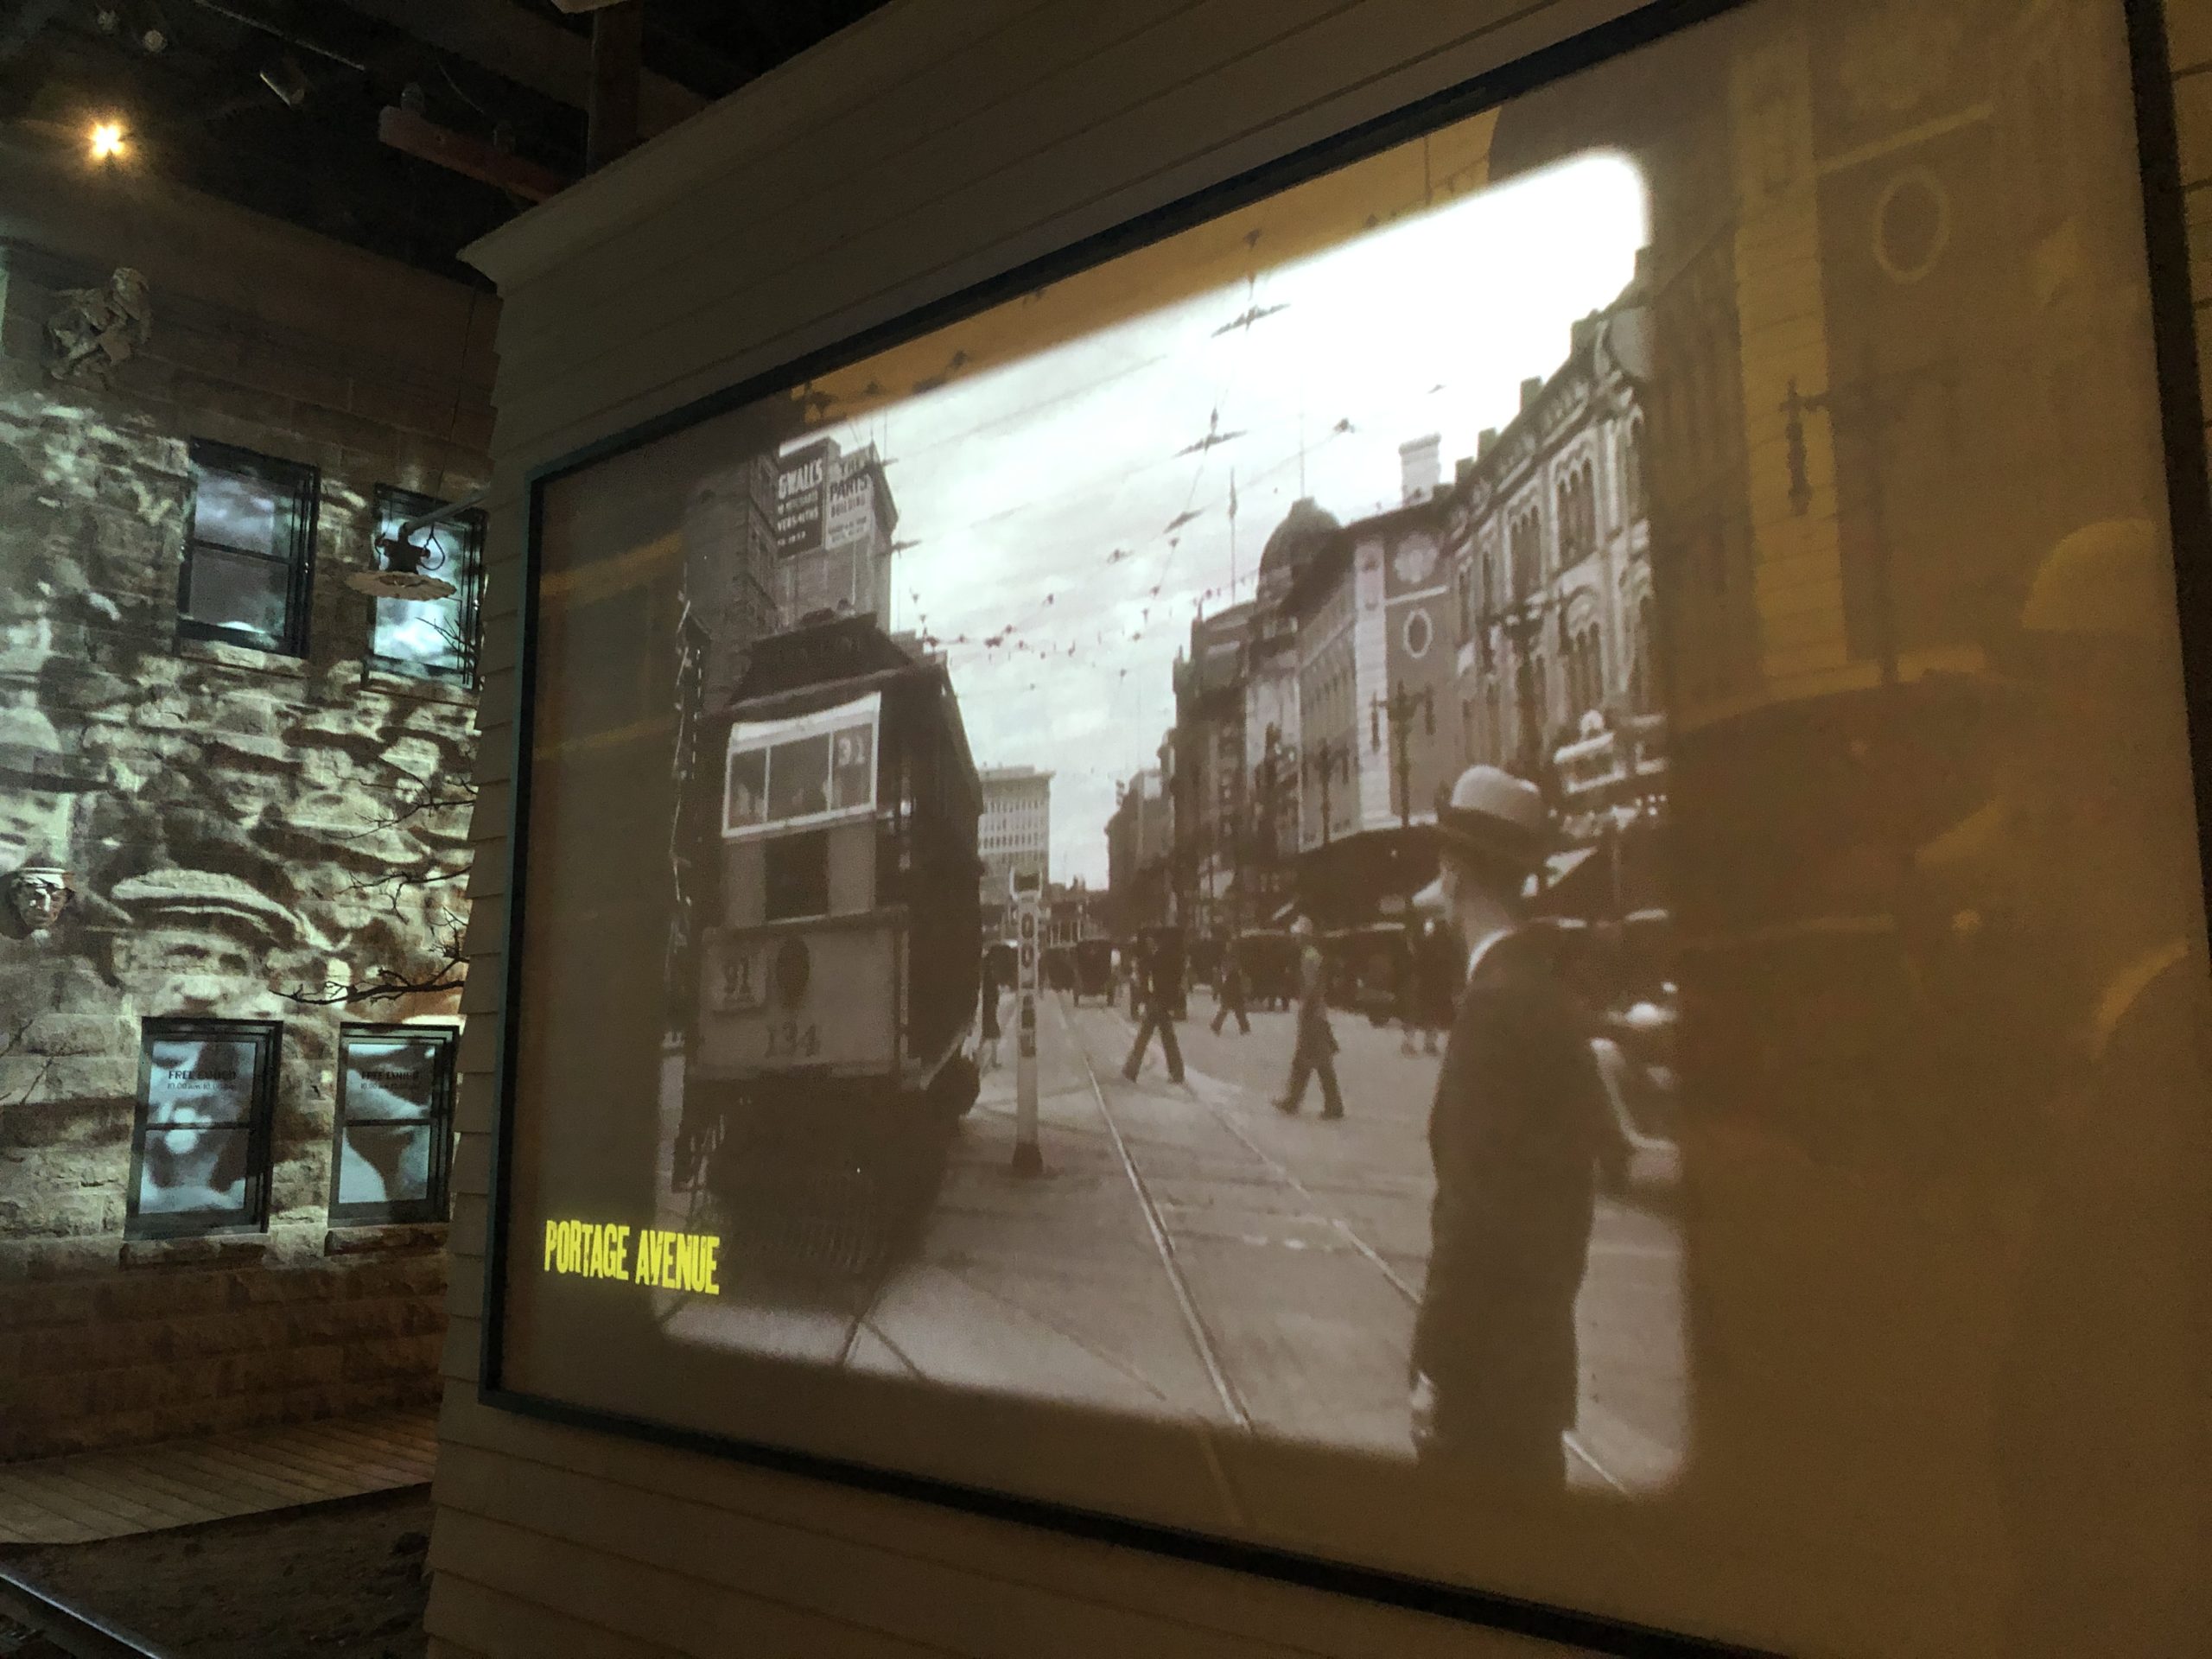 Black and white video footage of traffic on a street in the early 1900s projected onto a faux building exterior. The footage is labelled "Portage Avenue".